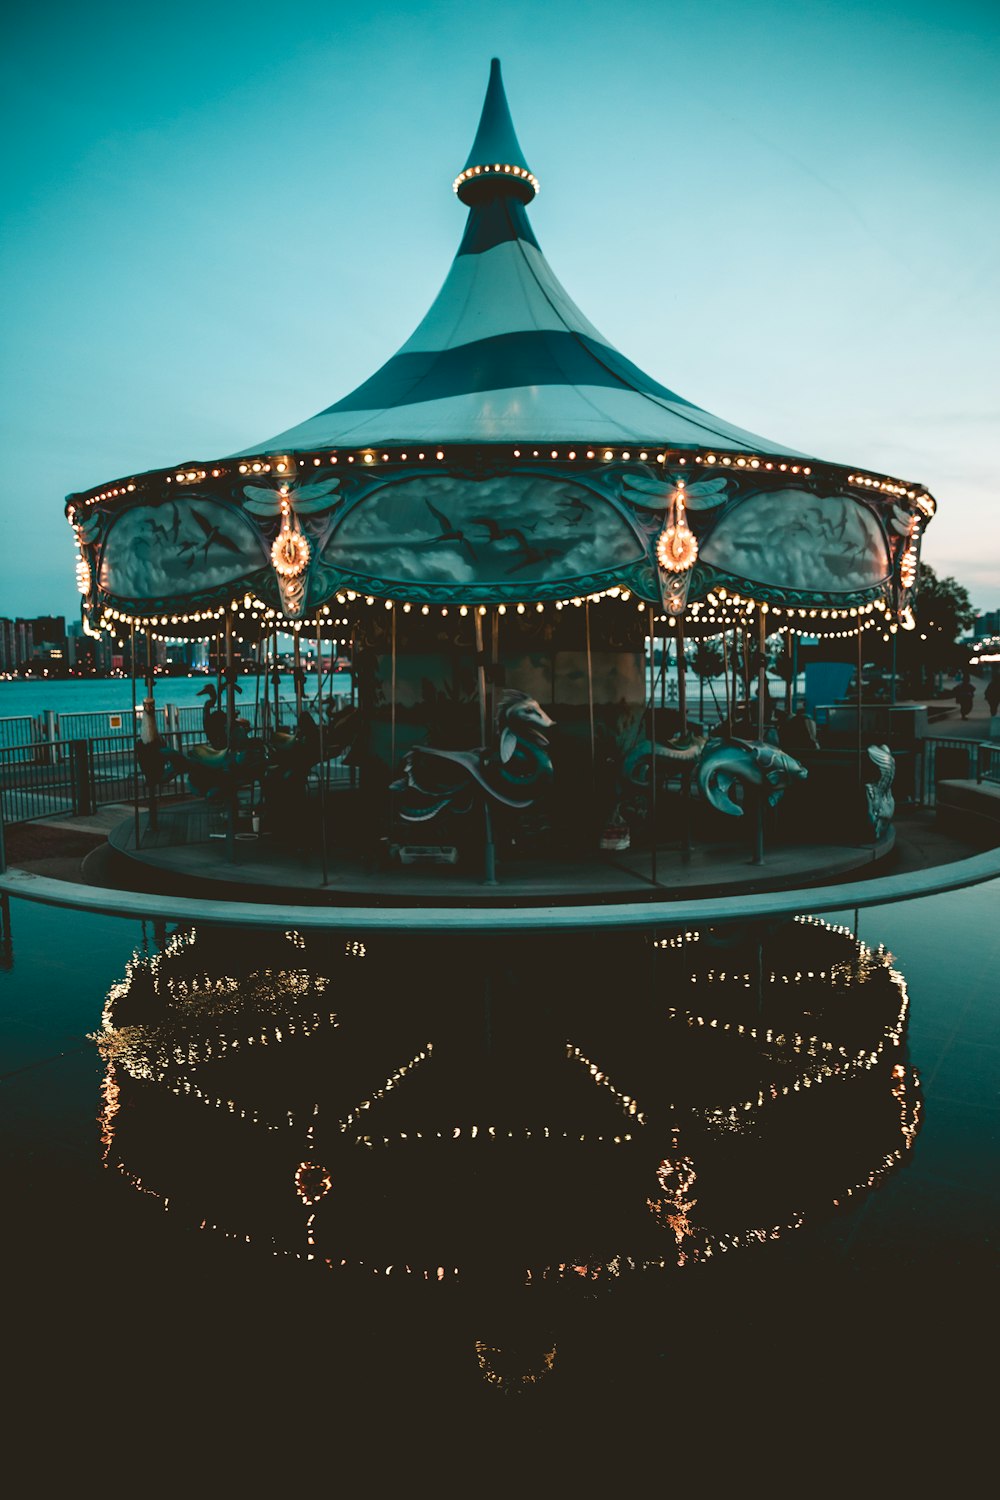 carousel with lights turned on during night time